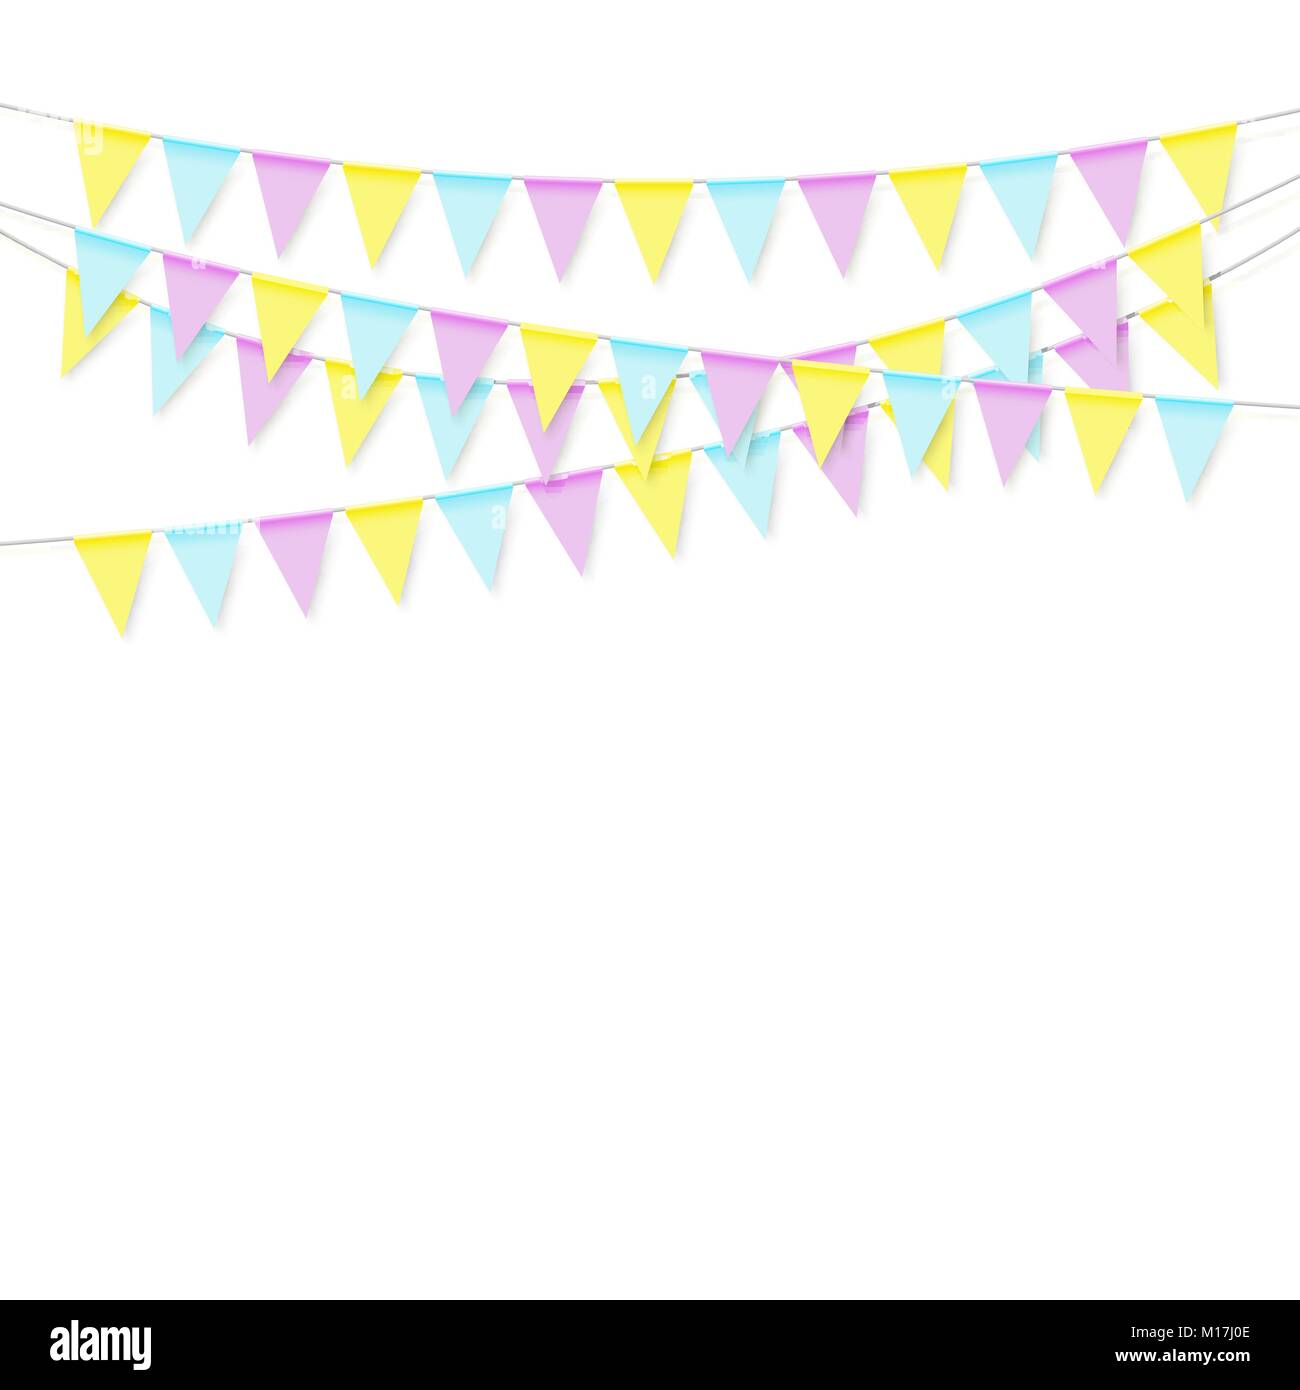 Colorful realistic soft colorful flag garland with shadow. Celebrate banner, party flags. Vector illustration isolated on white background Stock Vector